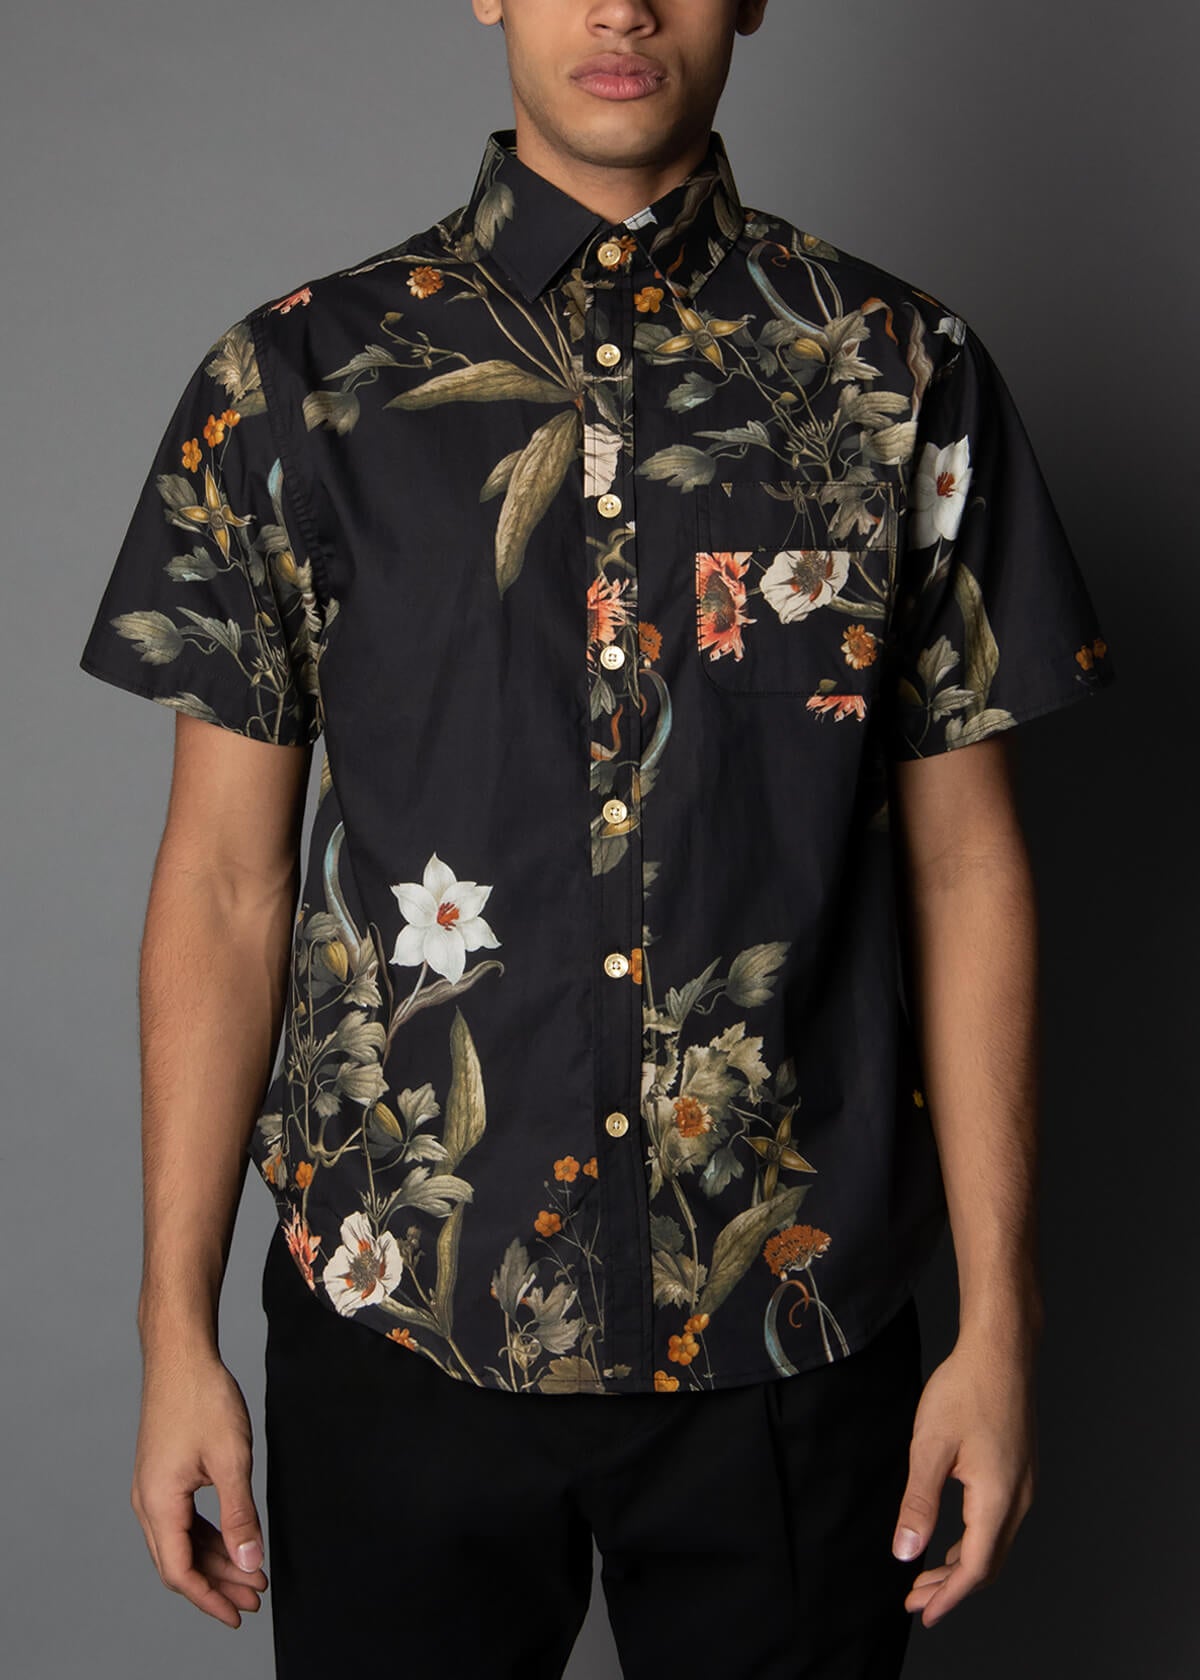 relaxed-fit short-sleeve men's shirt in navy, with a floral print